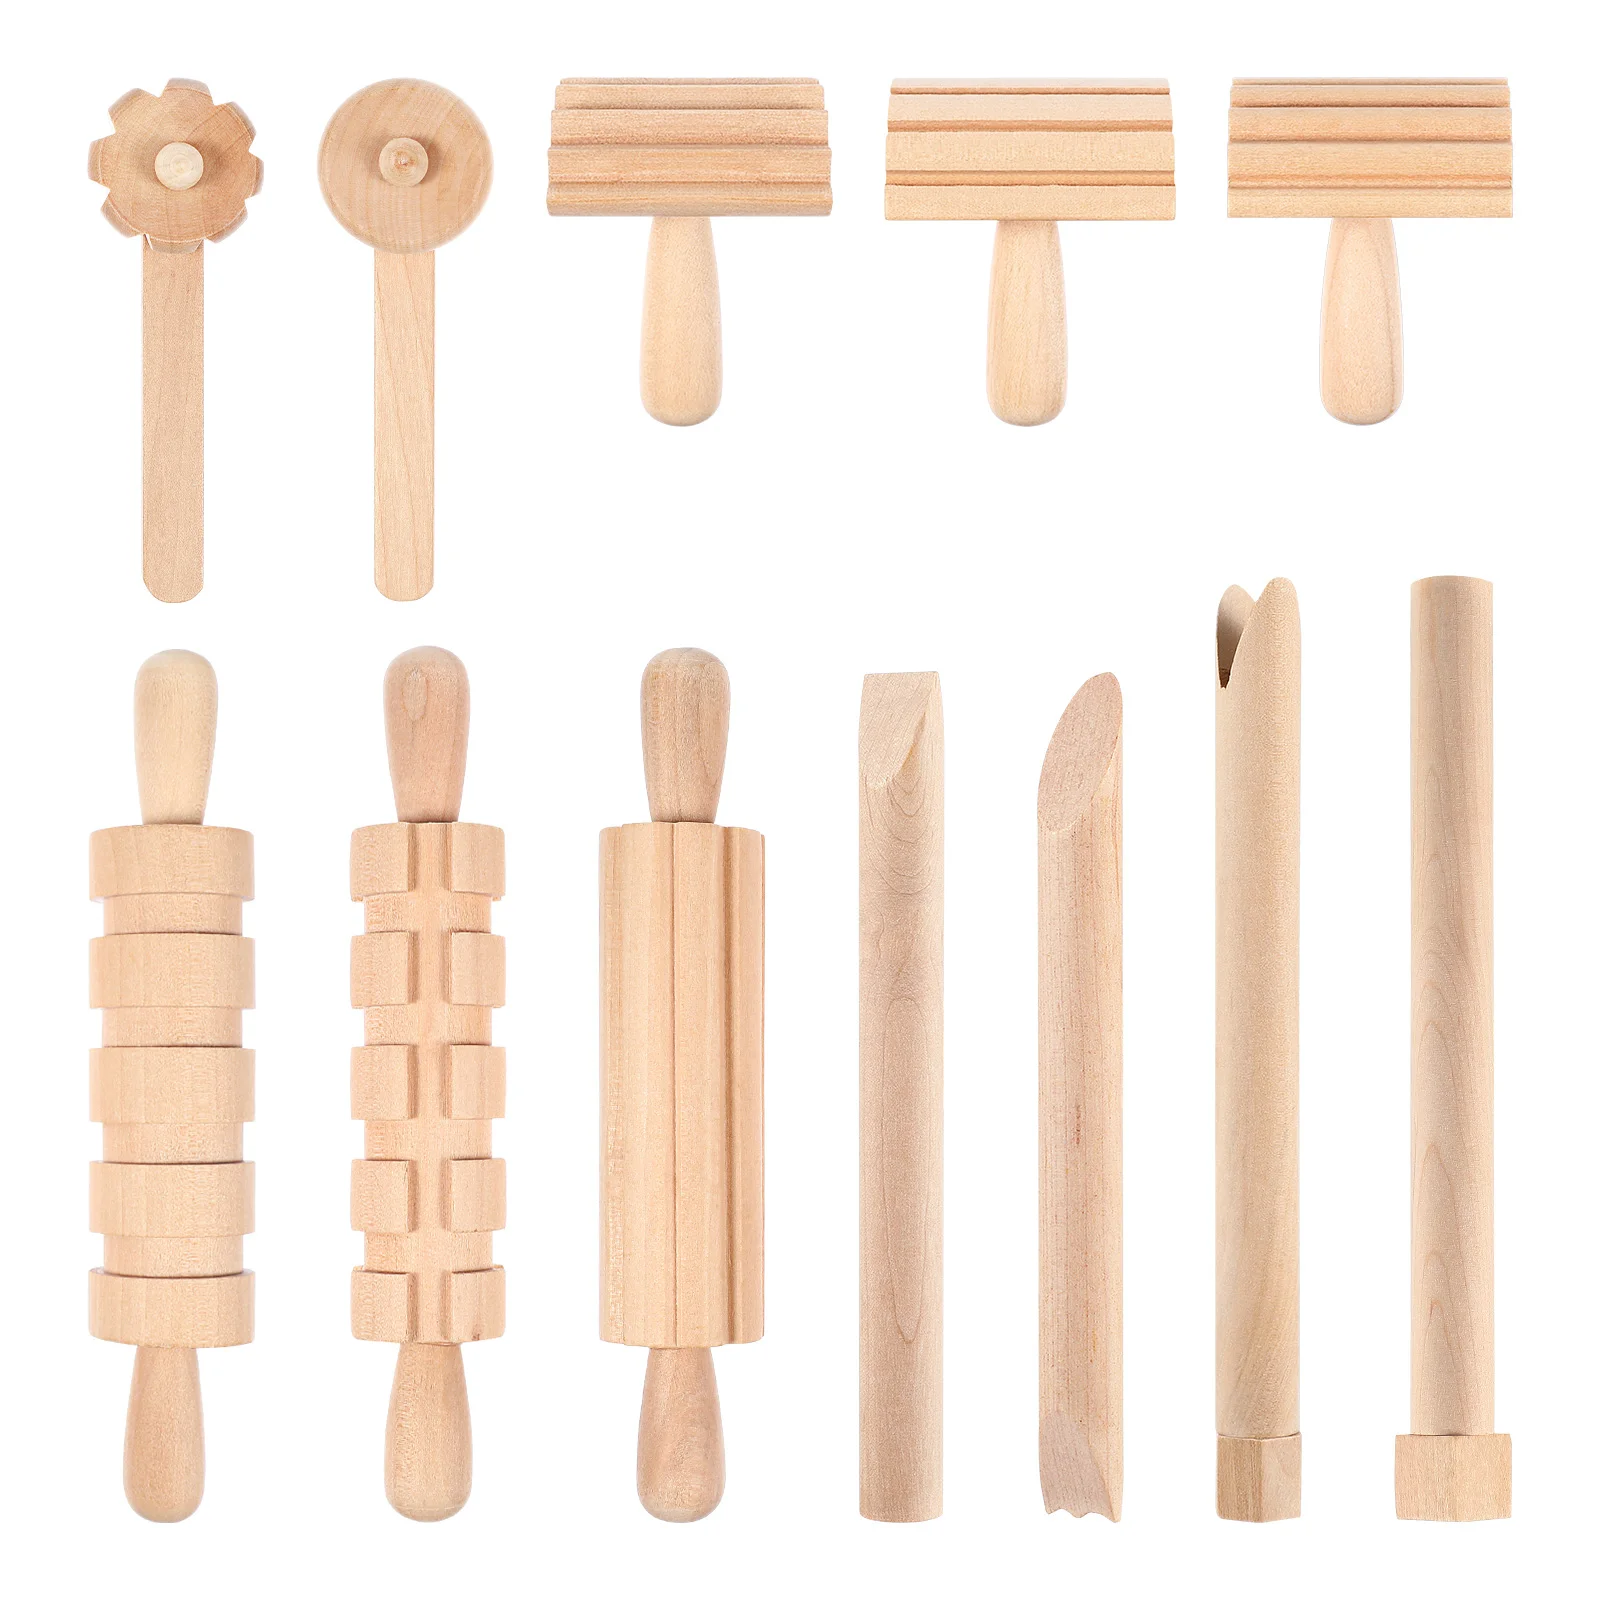 

Tools Clay Wooden Sculpting Carving Tool Dough Pottery Molding Wood Set Diy Sculpture Modeling Shaping Toys Kids Roller Stampers